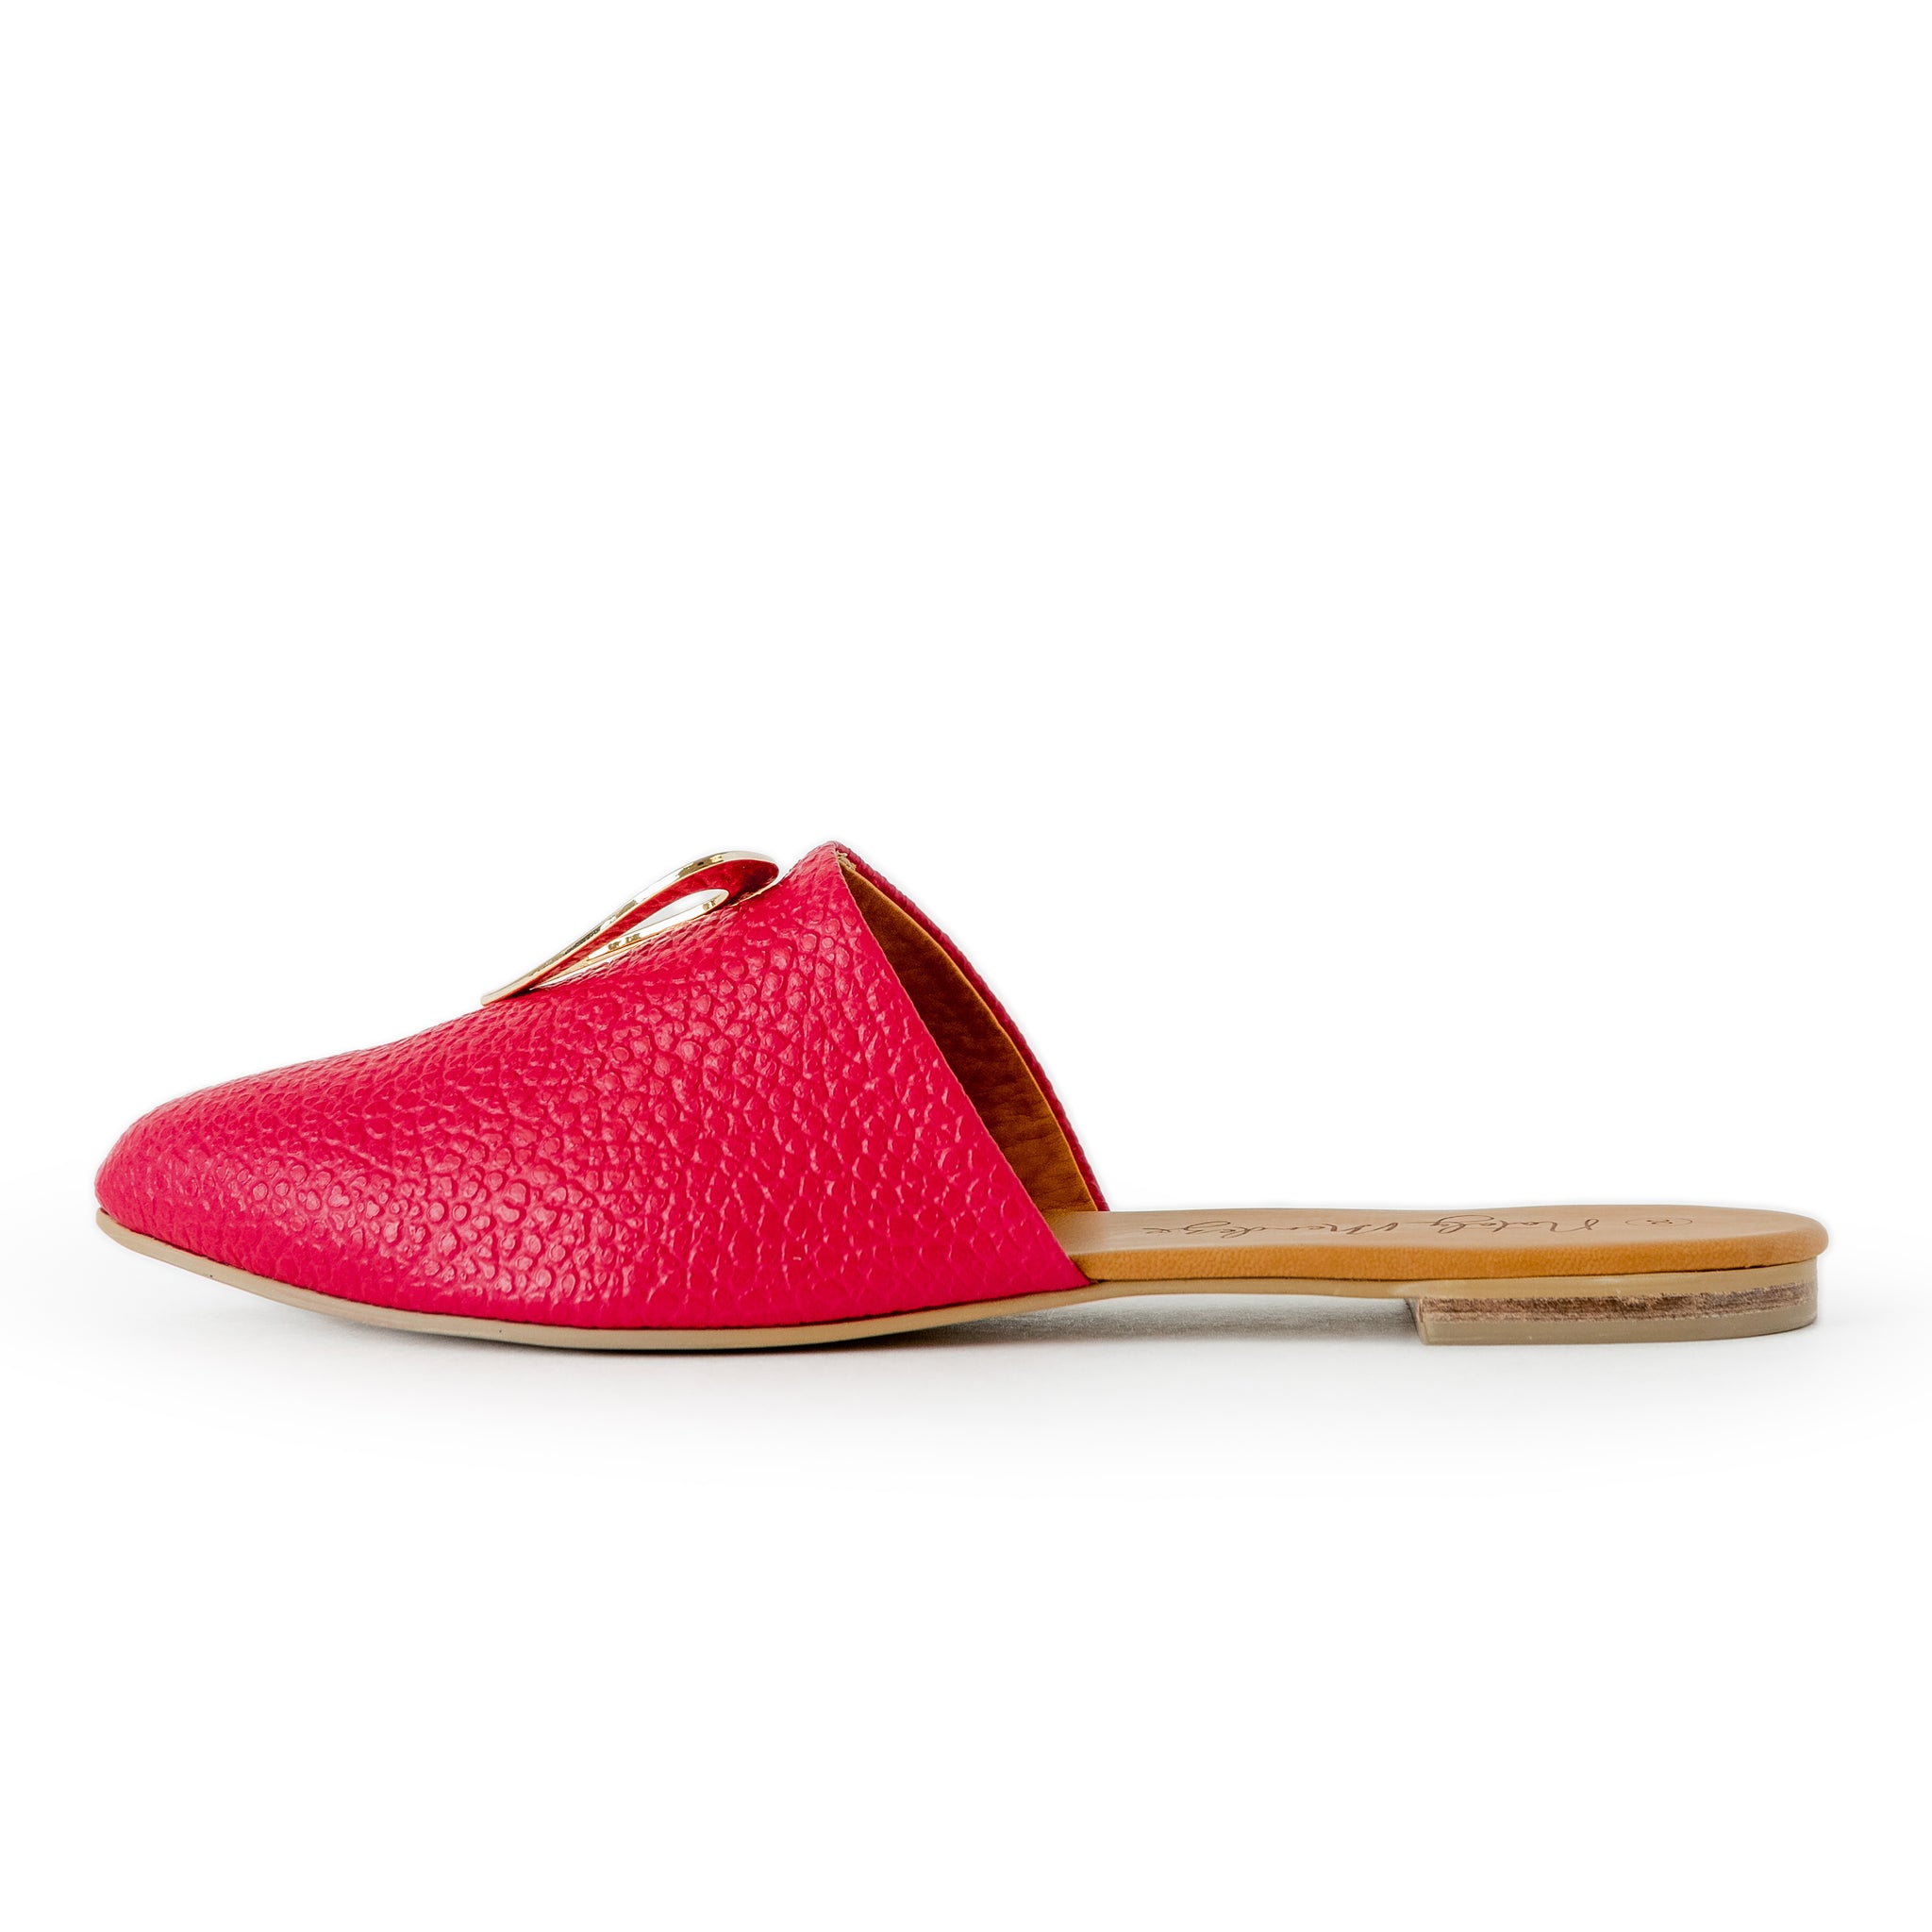 Tina Cherry by Nataly Mendez FEATURES  Genuine leather  Insole lining made of leather Italian sole Heel height .5 cm Handmade